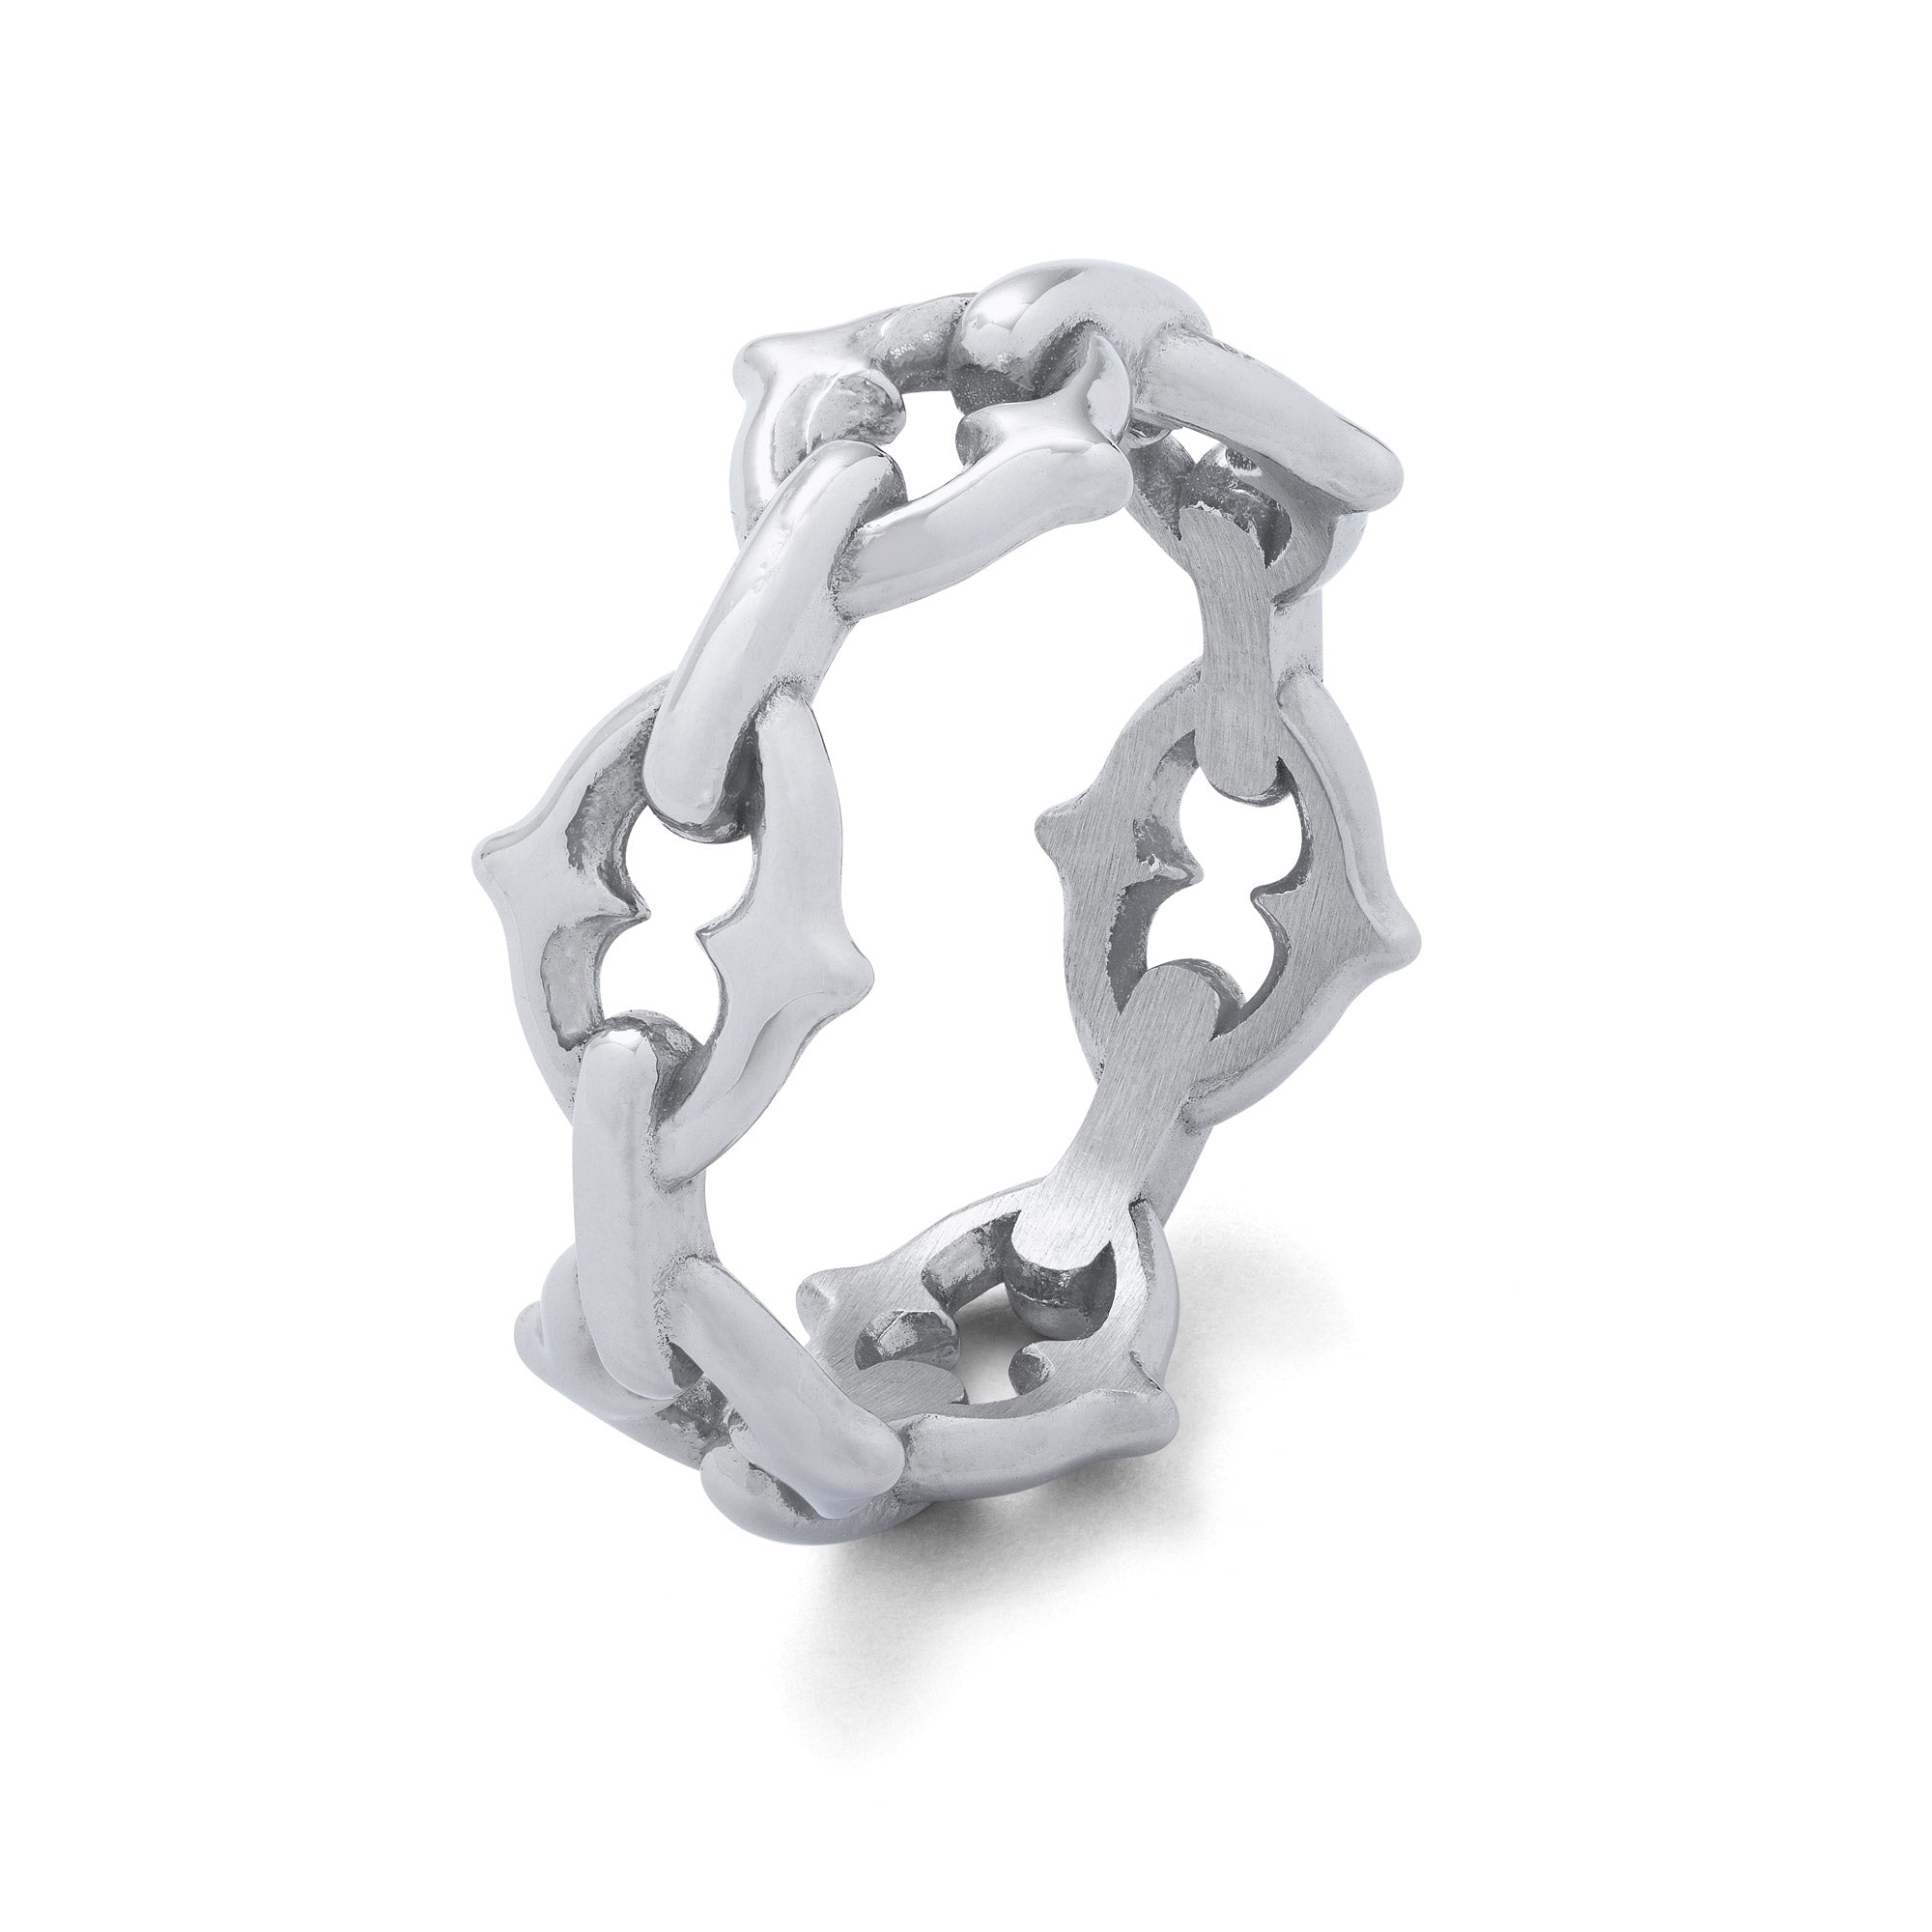 Gothic spike ring in silver